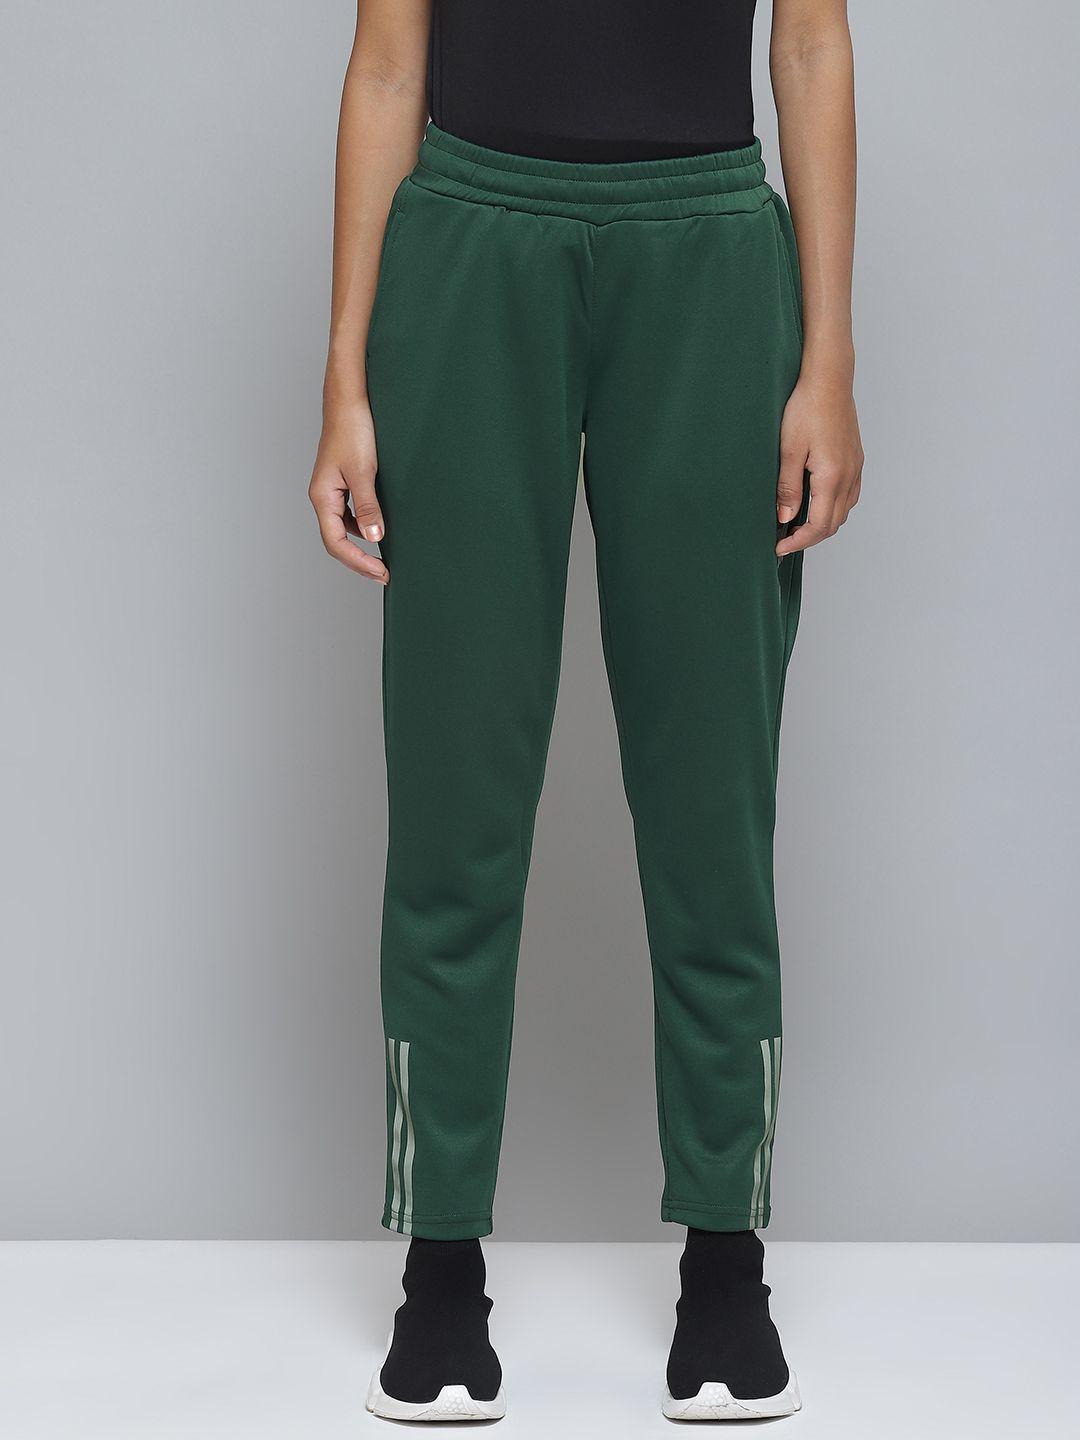 alcis-women-teal-green-solid-track-pants